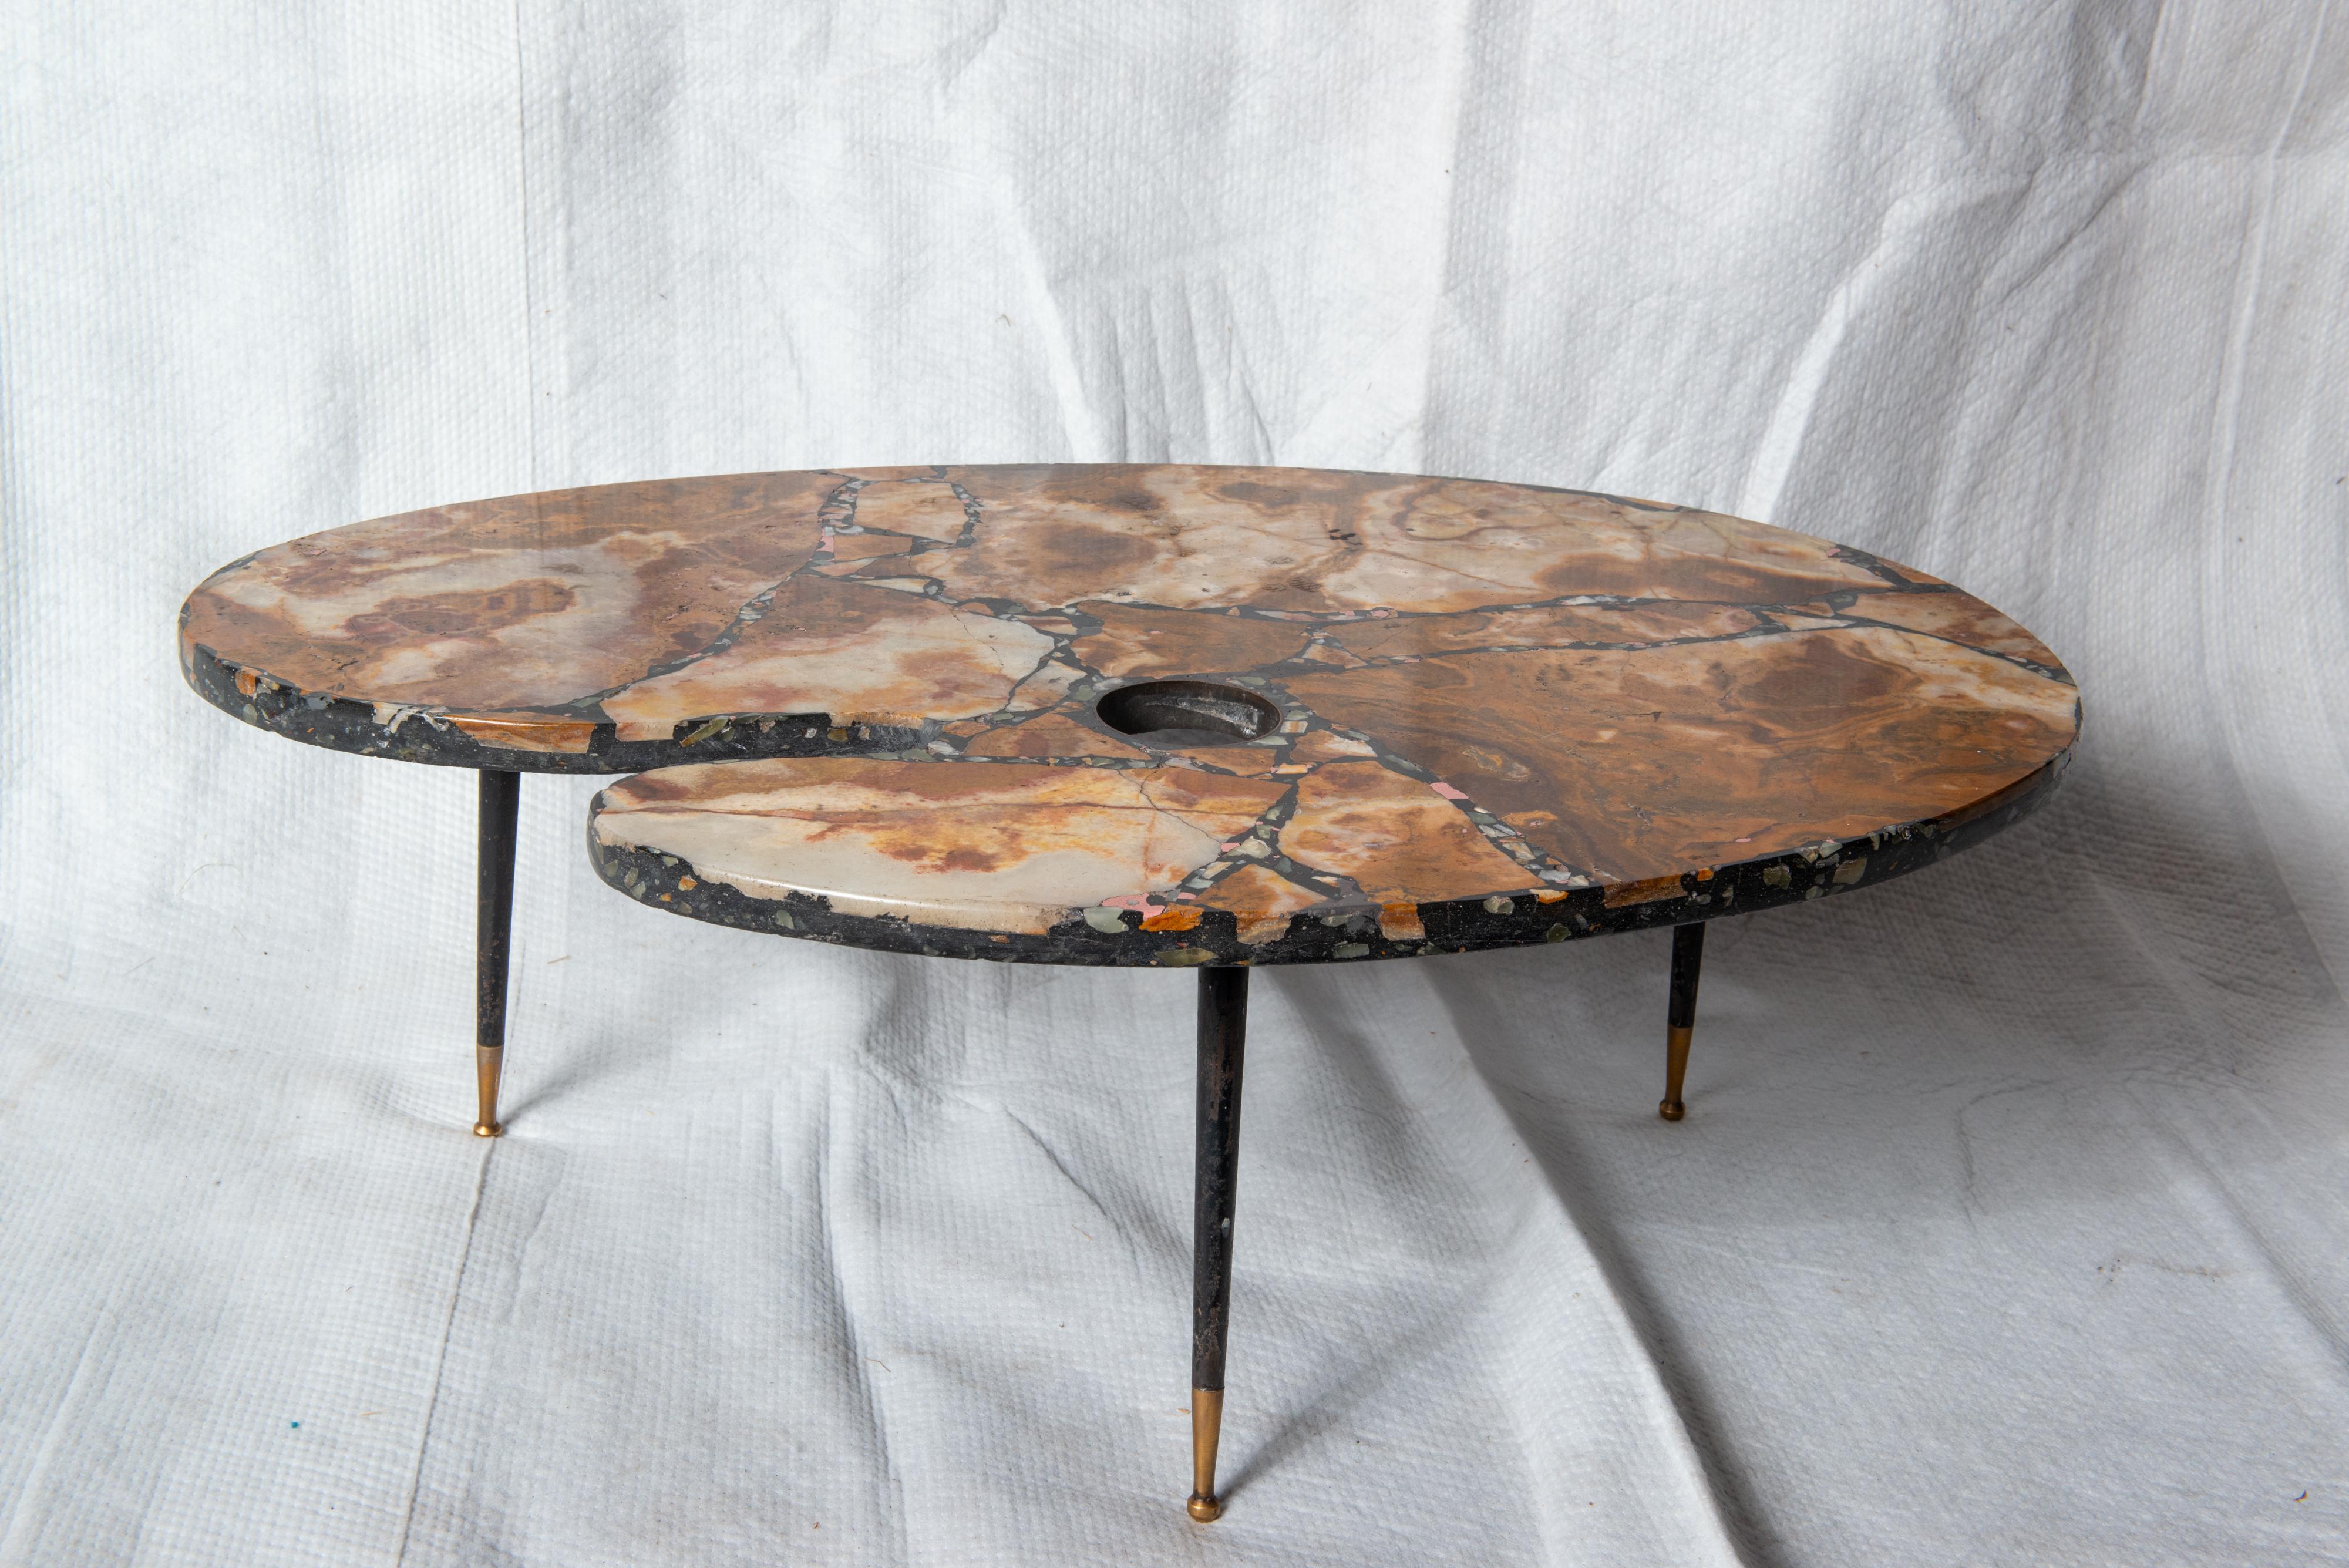 A very unusual small coffee table or side table in marble mosaic in the shape of a painter's palette supported by a trio of slender metal legs capped in brass spheres.